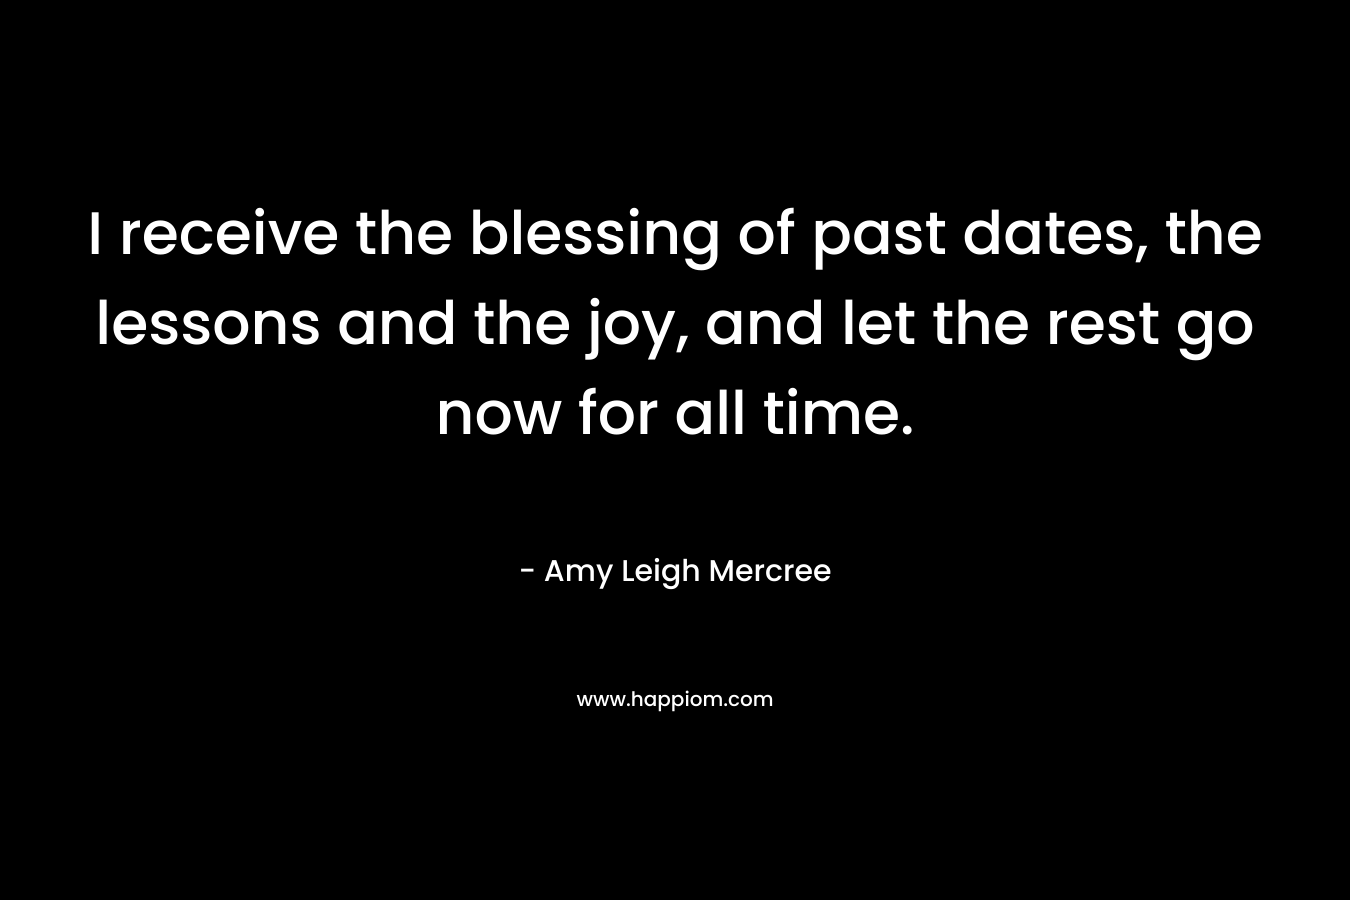 I receive the blessing of past dates, the lessons and the joy, and let the rest go now for all time. – Amy Leigh Mercree